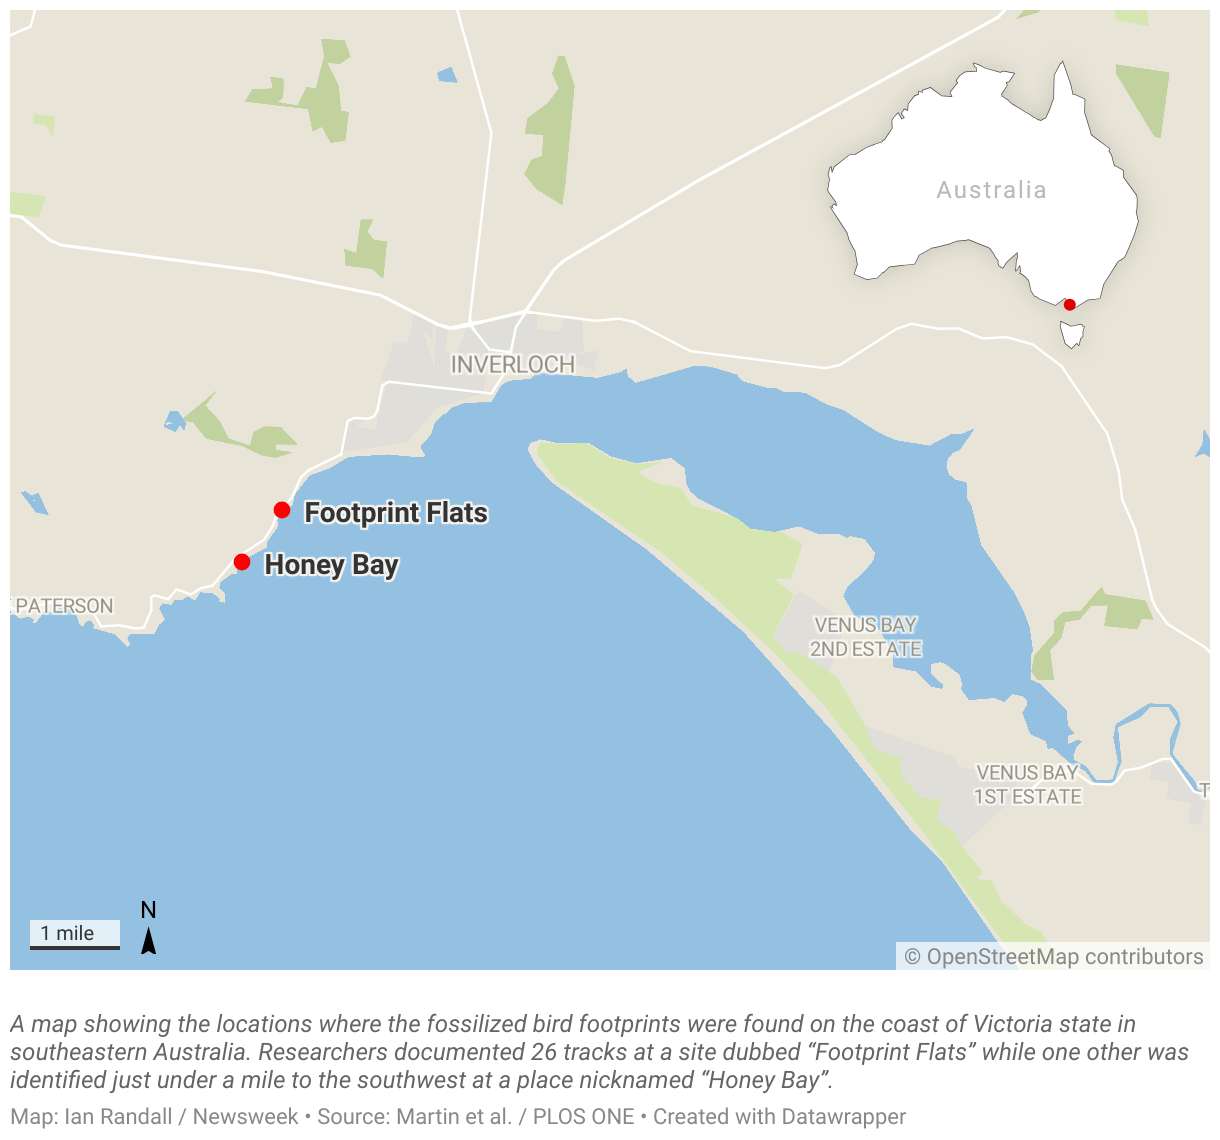 A map showing the locations where the fossilized bird footprints were found on the coast of Victoria state in southeastern Australia.